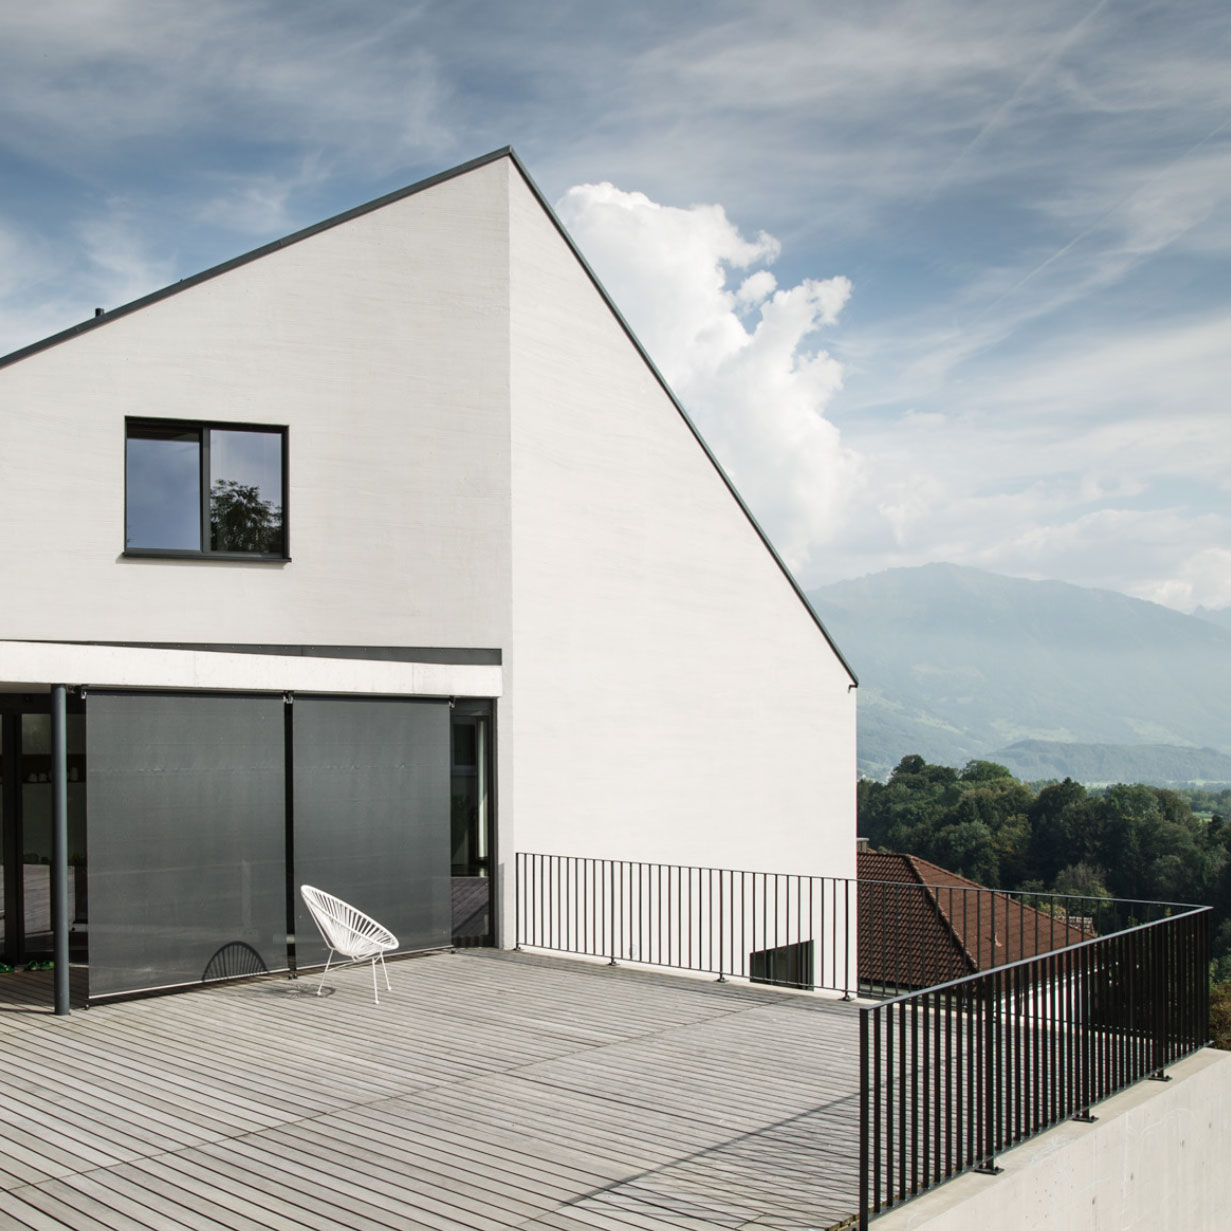 Architectural photography of houses in Zurich Oberland